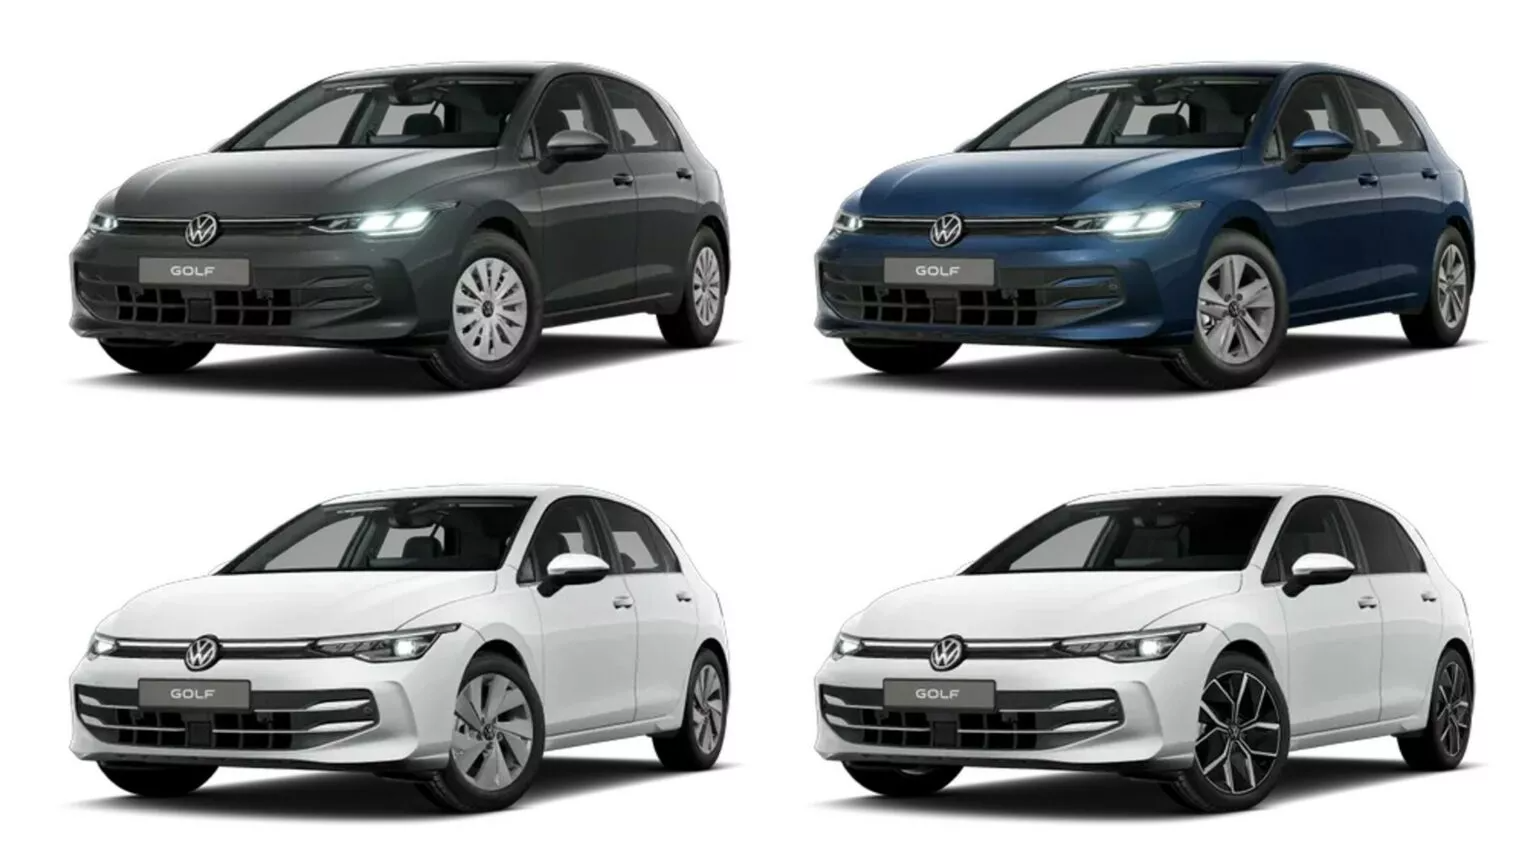 Volkswagen started selling the new Golf in Europe and released the anniversary model Edition 50